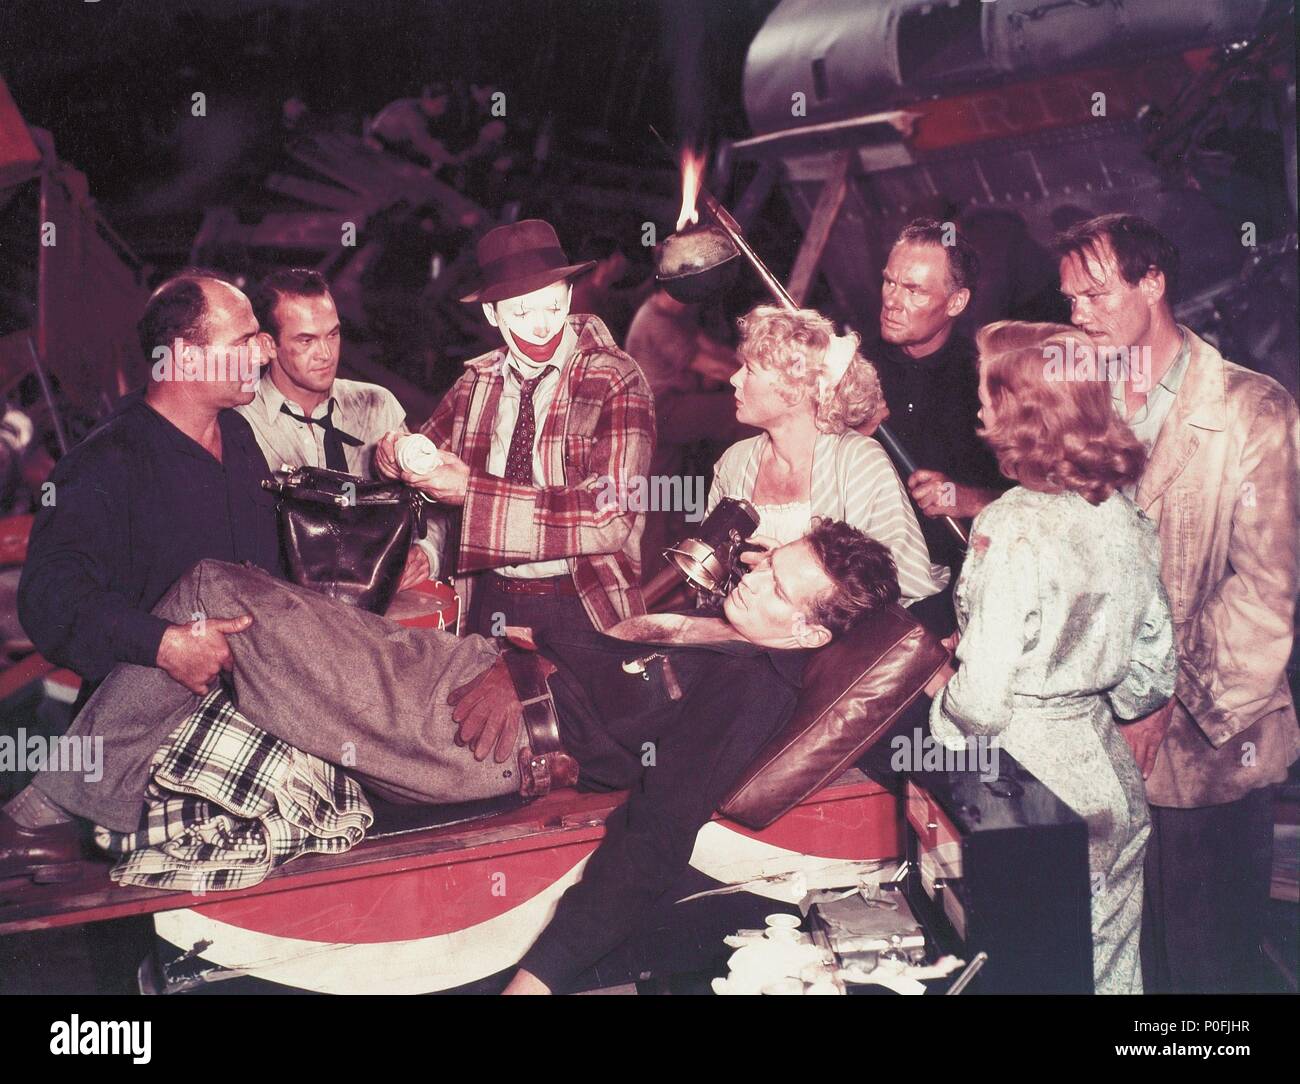 Original Film Title: THE GREATEST SHOW ON EARTH.  English Title: THE GREATEST SHOW ON EARTH.  Film Director: CECIL B DEMILLE.  Year: 1952.  Stars: JAMES STEWART; CHARLTON HESTON; BETTY HUTTON. Credit: PARAMOUNT PICTURES / Album Stock Photo